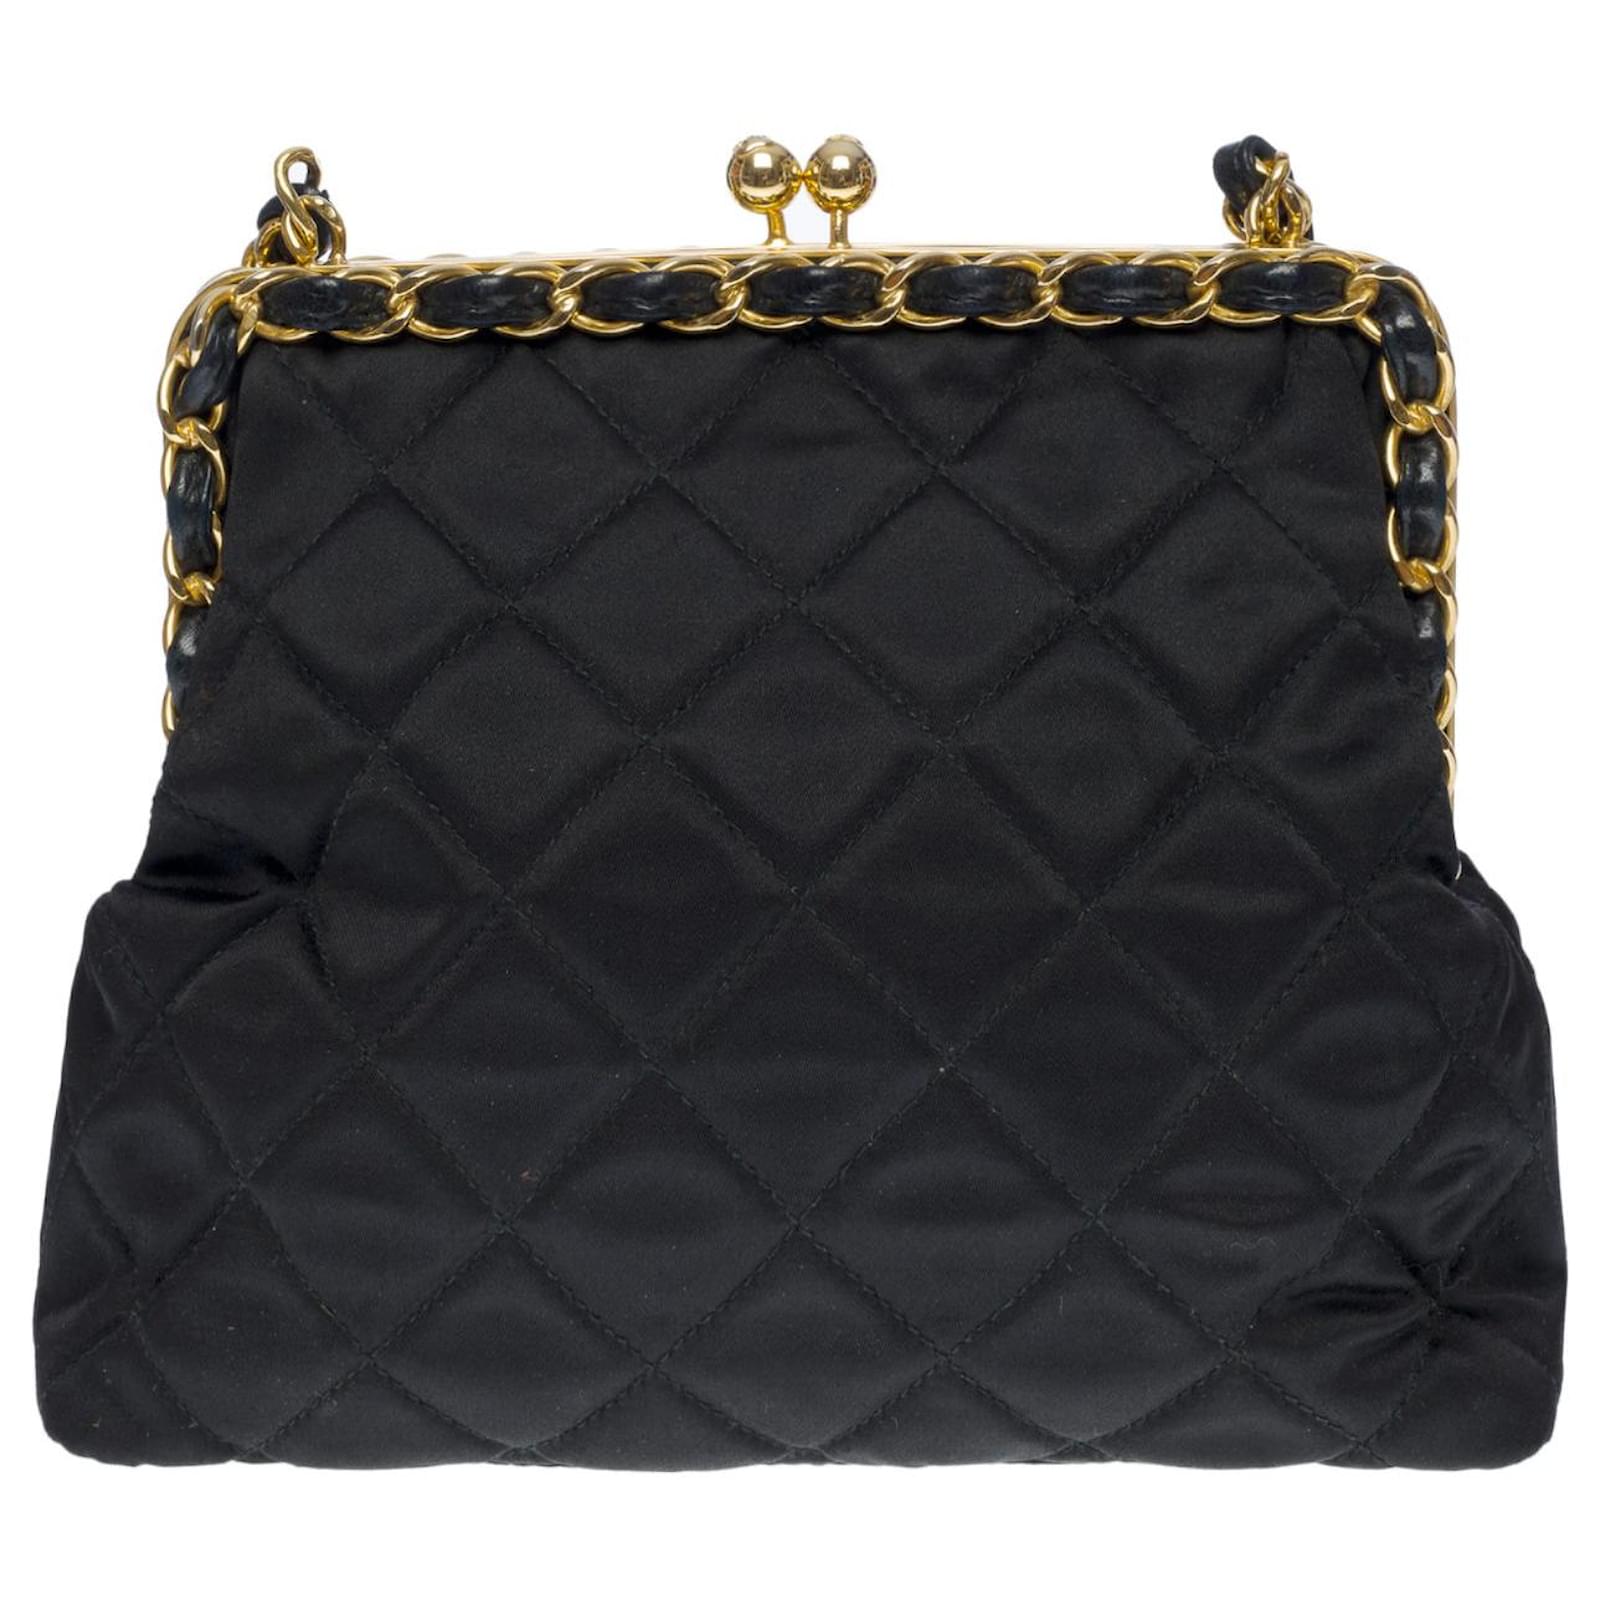 CHANEL Quilted Satin Evening Bag - A Retro Tale